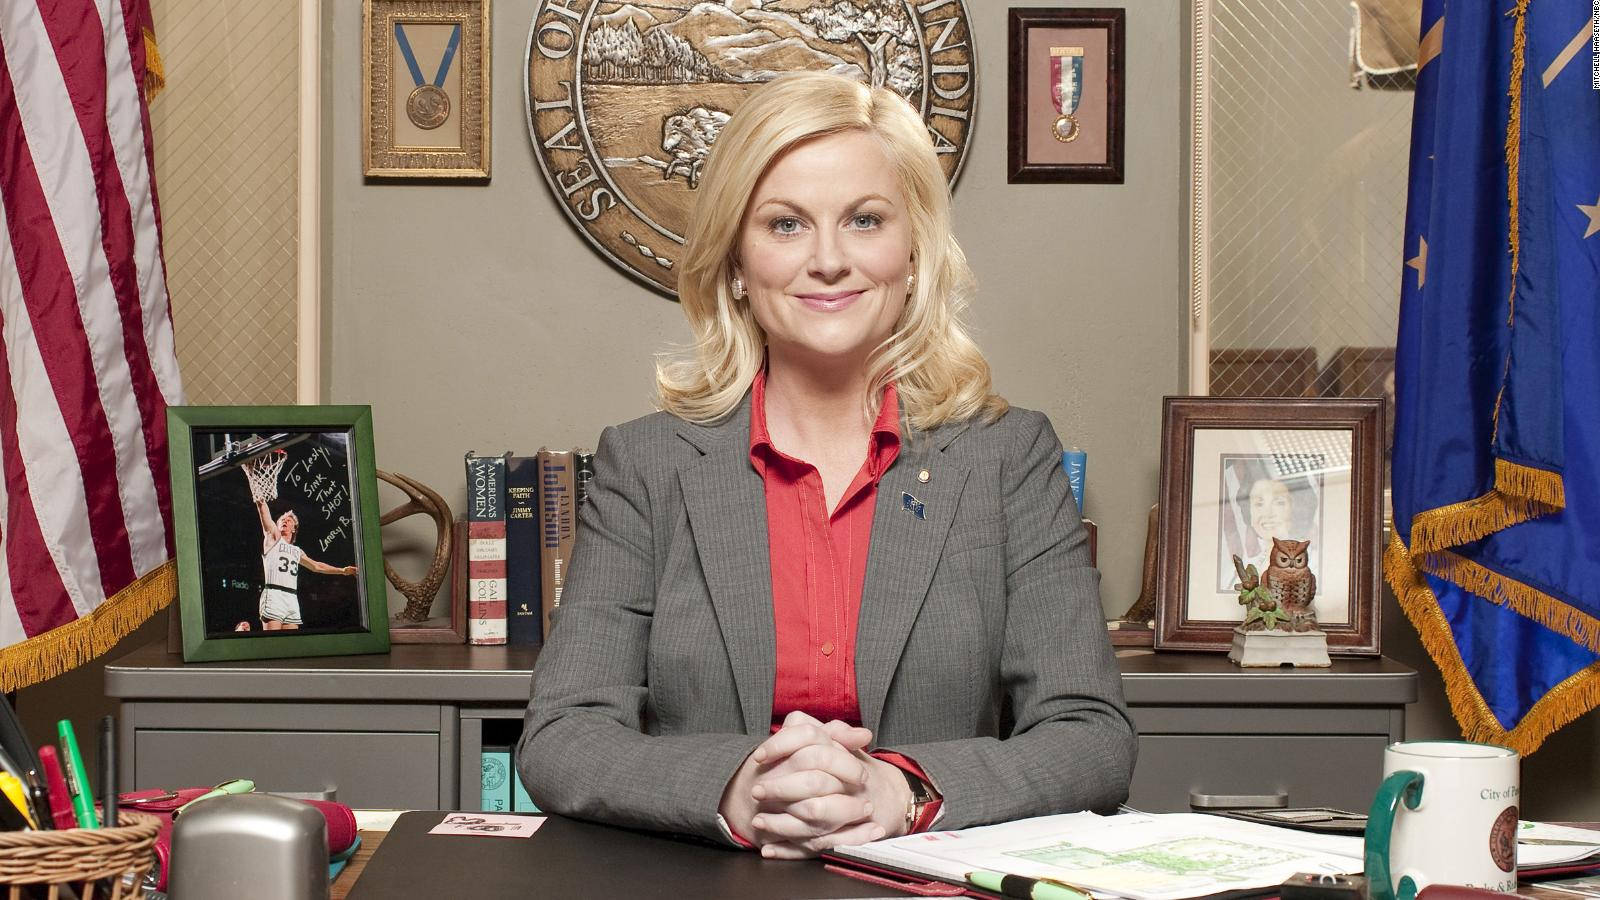 Amy Poehler as Leslie Knope in Parks and Recreation Wallpaper